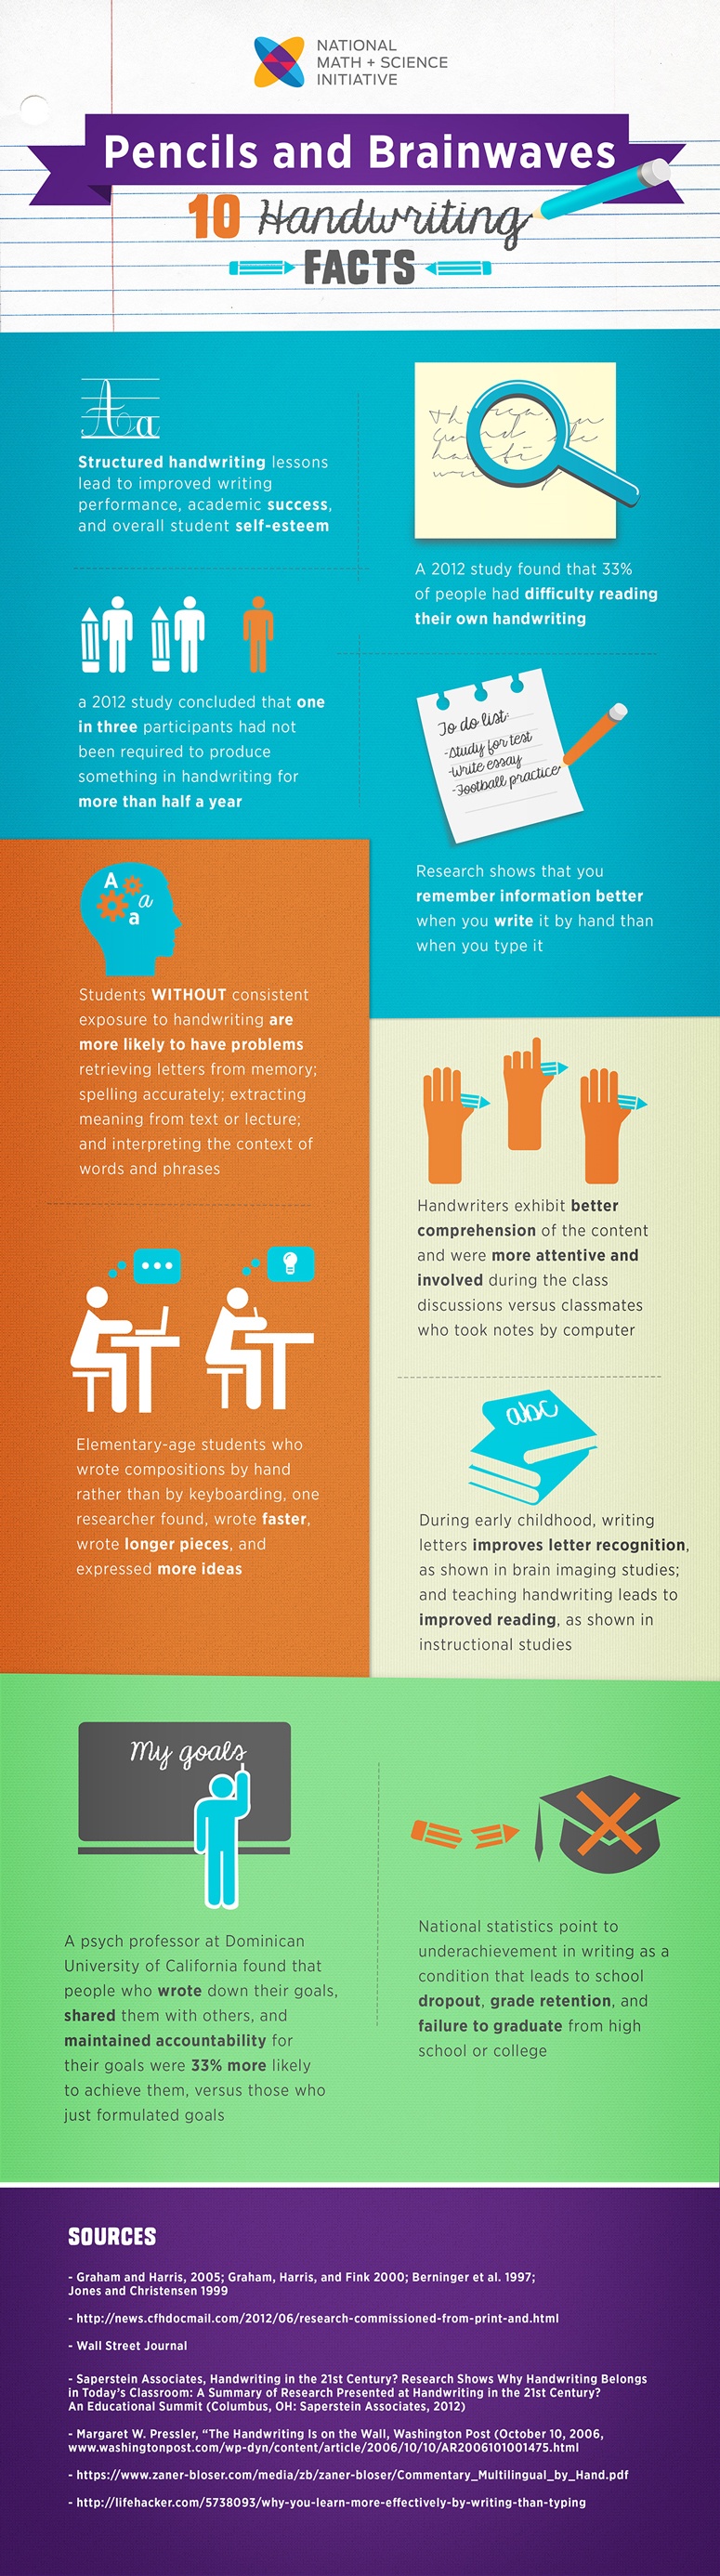 Why Handwriting is Important for Learning Infographic